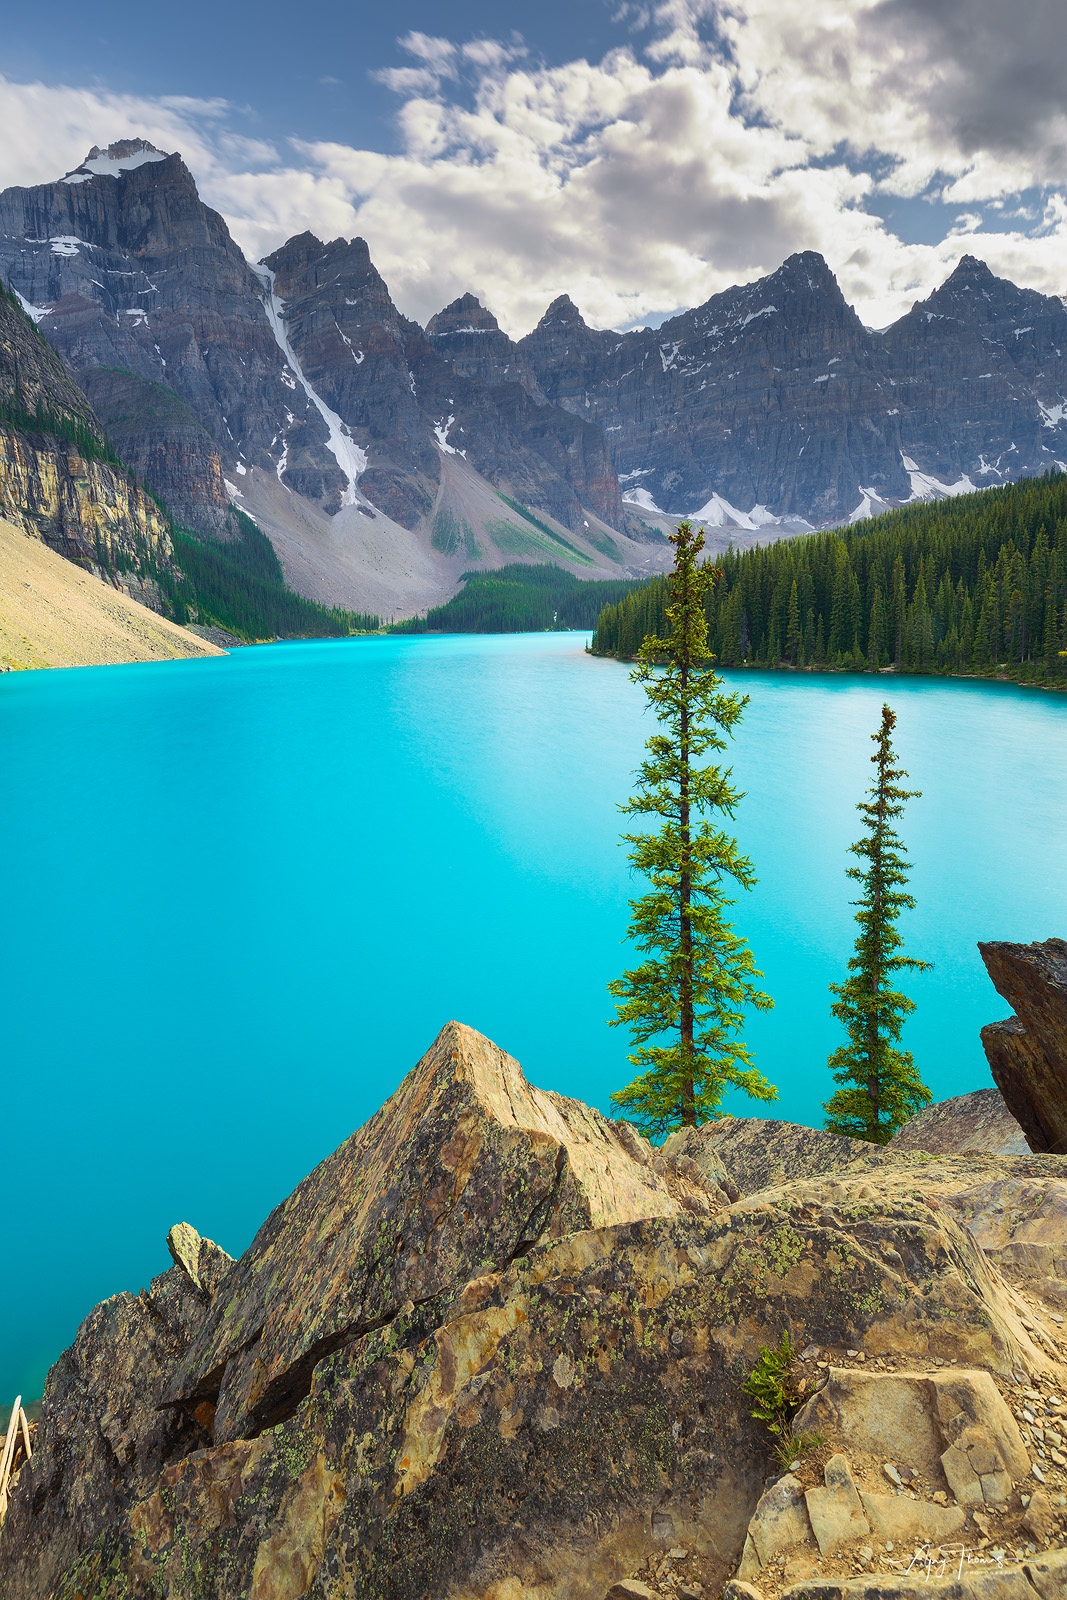 Tucked away below the foothills was this glacially-fed Moraine Lake 8.7 miles outside the village of Lake Louise, Alberta, Canada...